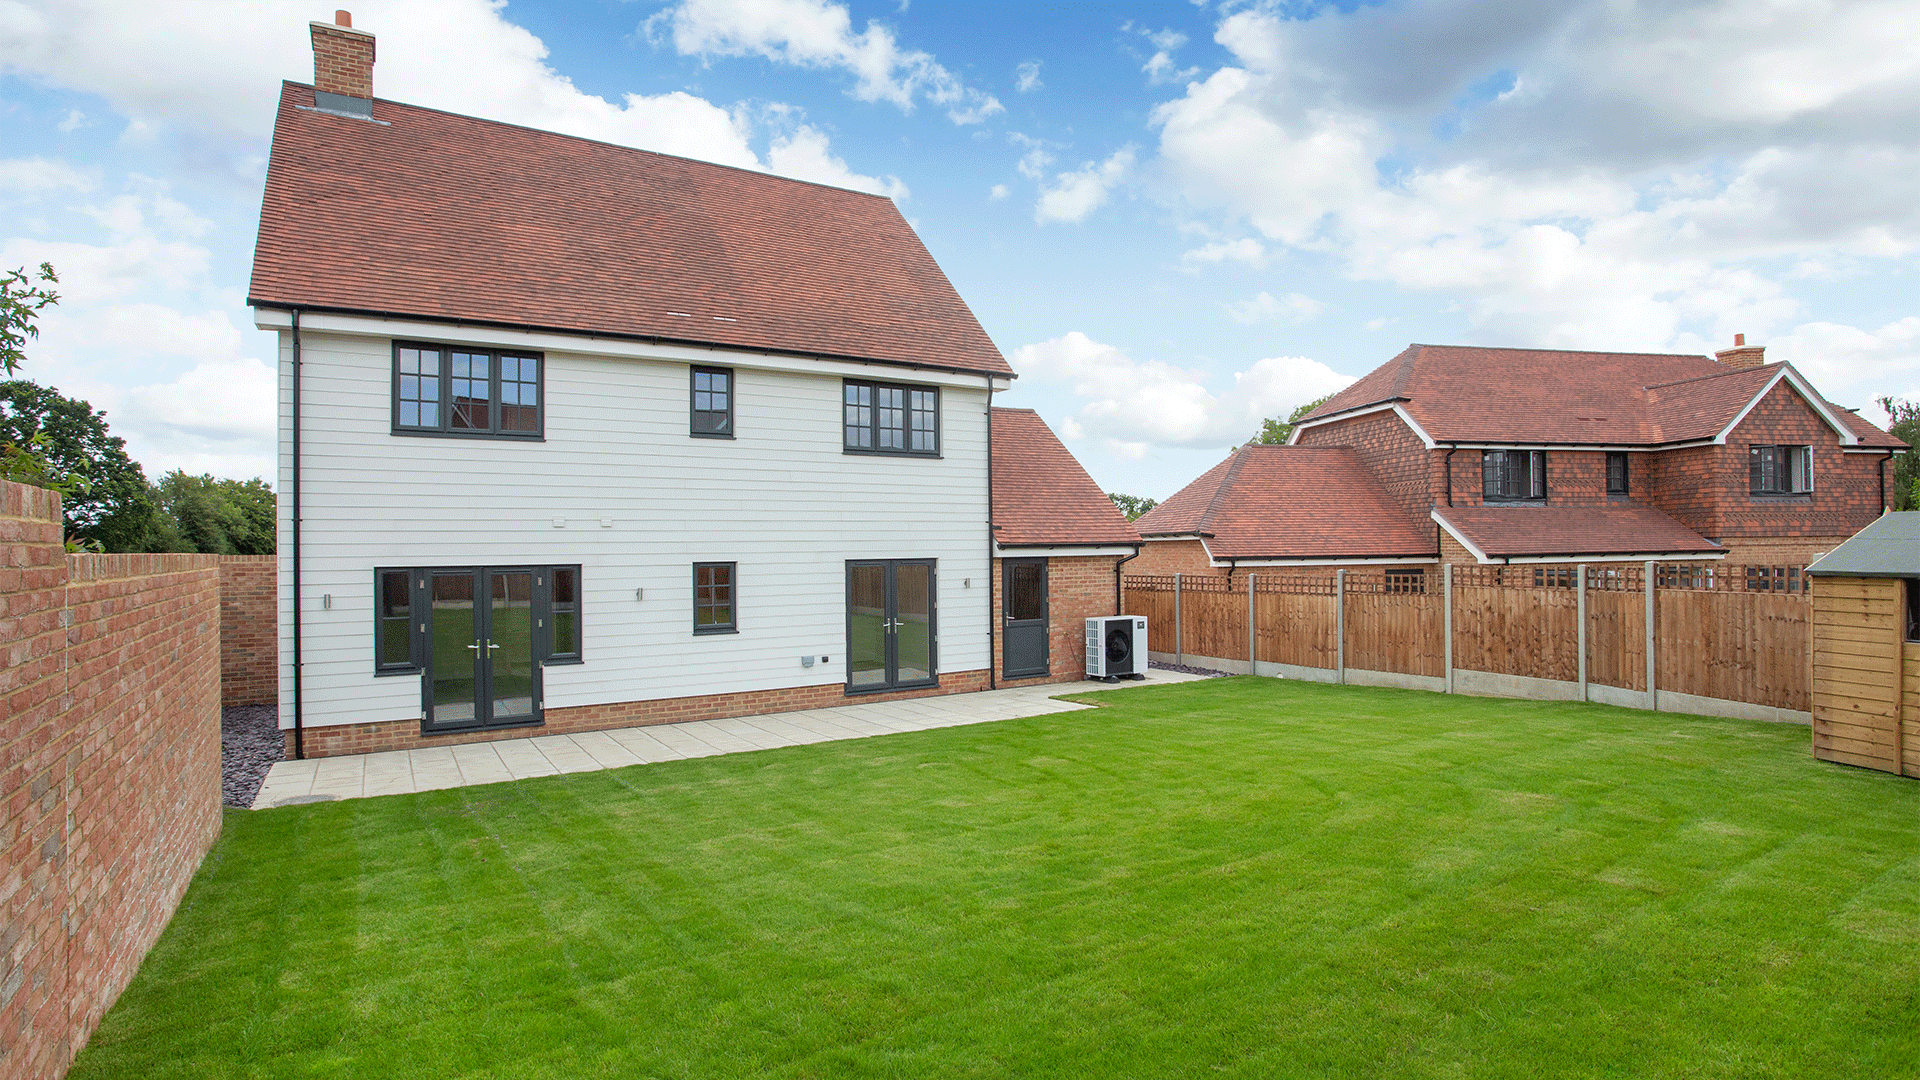 3 bedroom detached house rear view at Miller's Meadow with a landscaped garden and air source heat pump